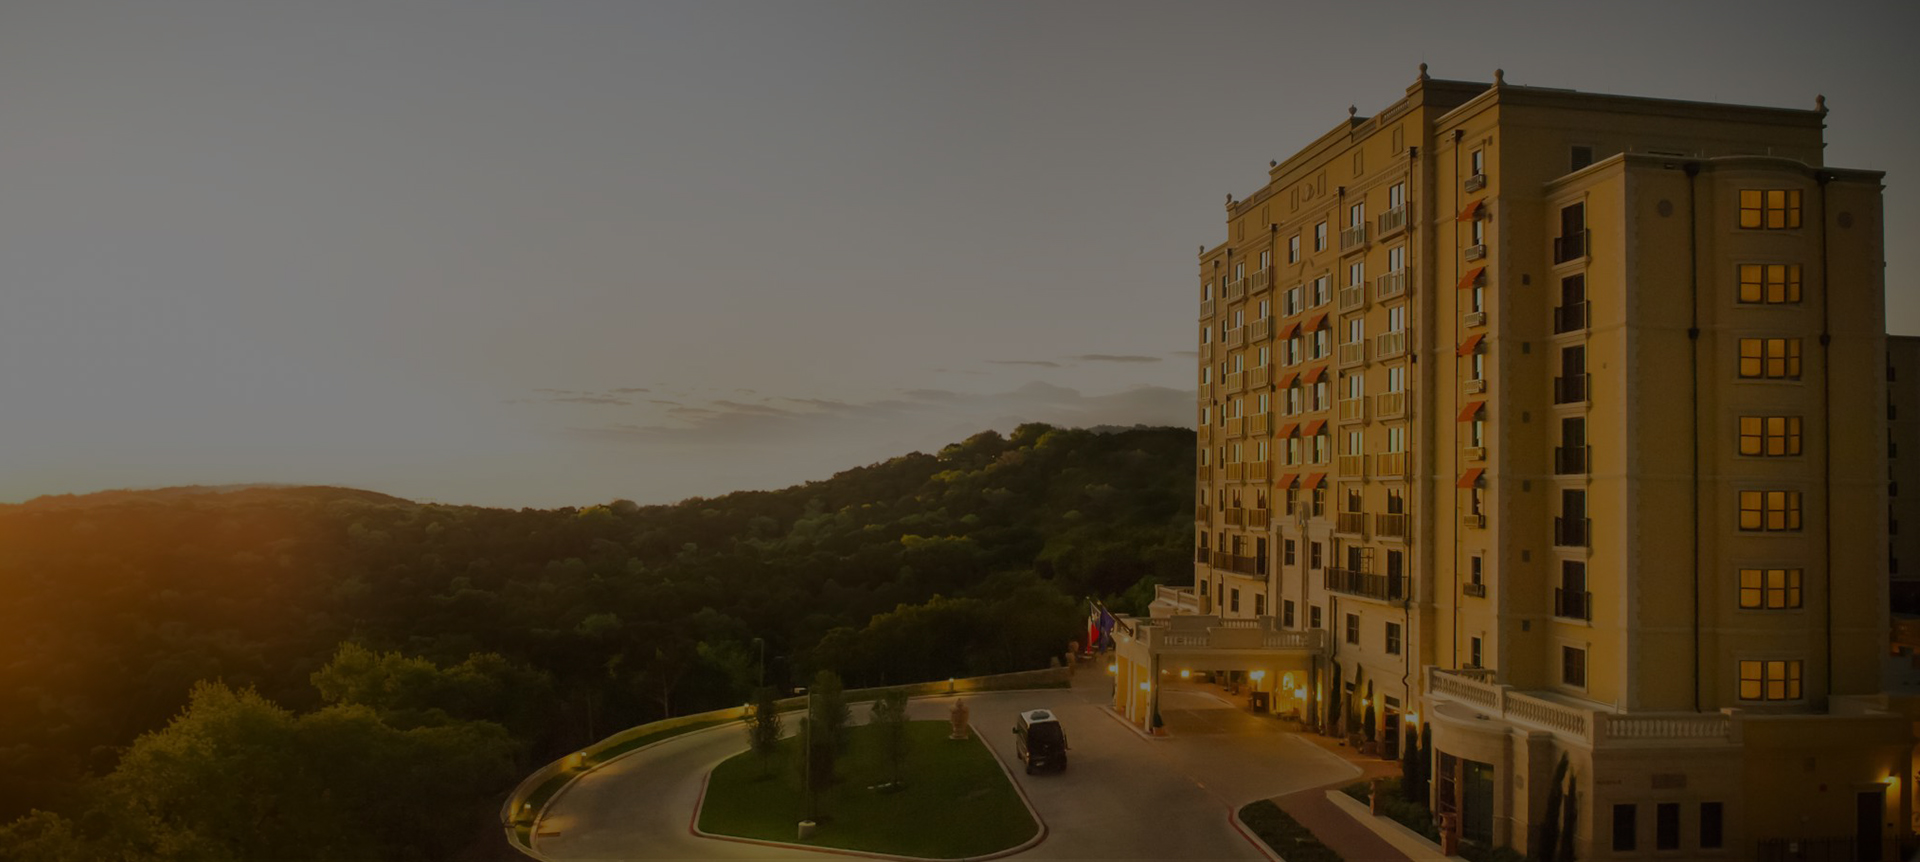 exterior look of the hotel building during sunset